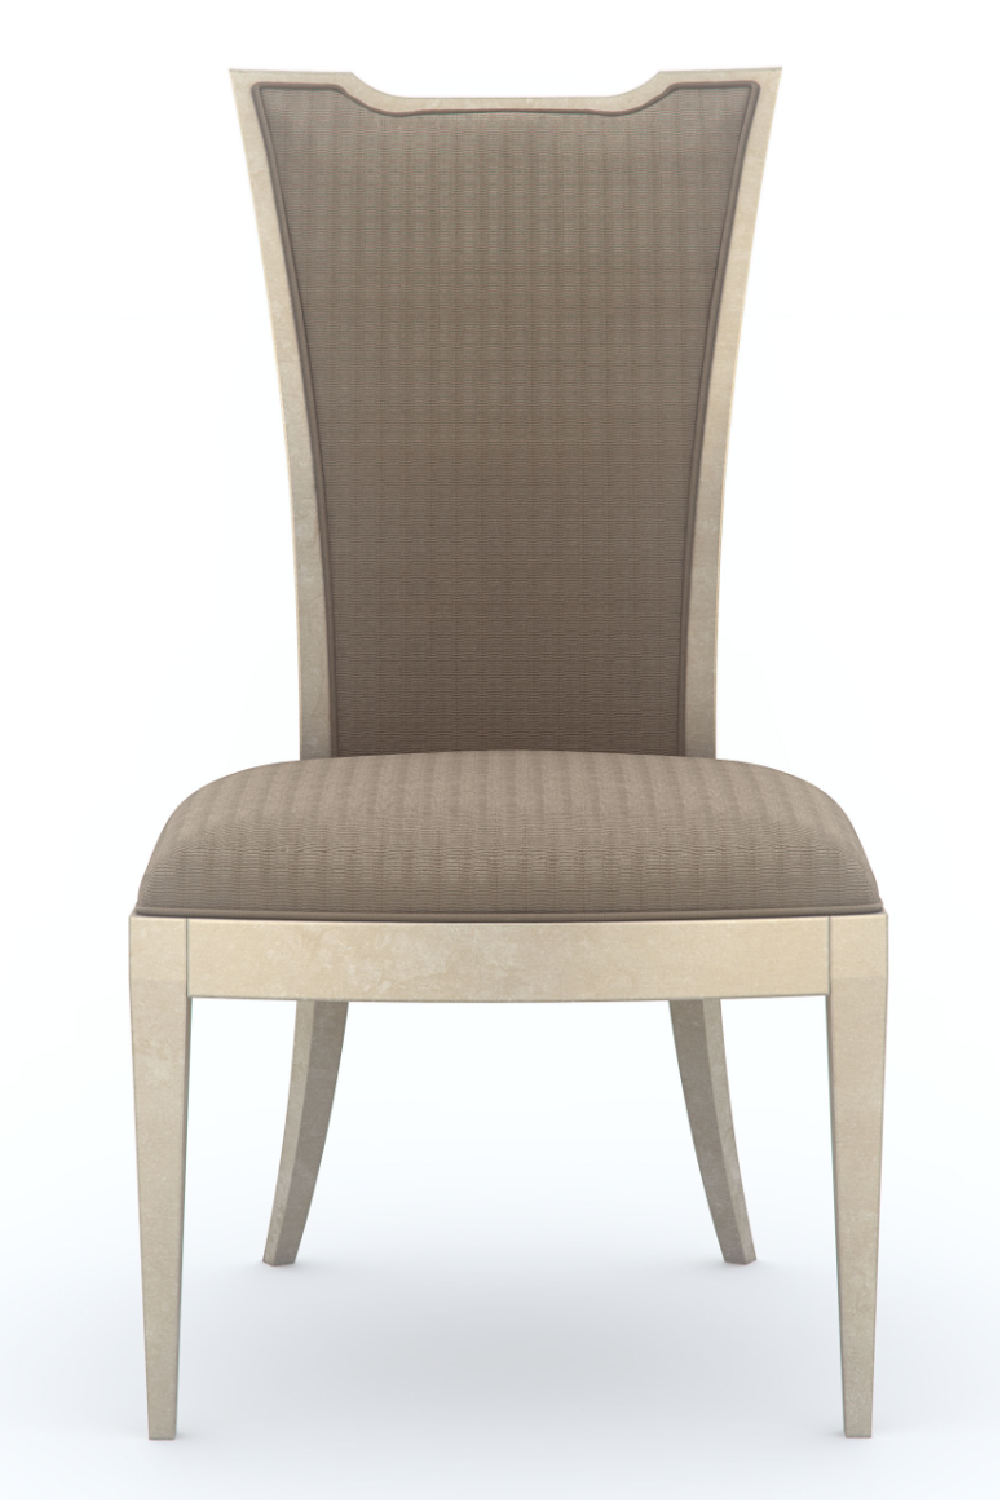 Neutral Toned Dining Chair (2) | Caracole Very Appealing | Oroa.com